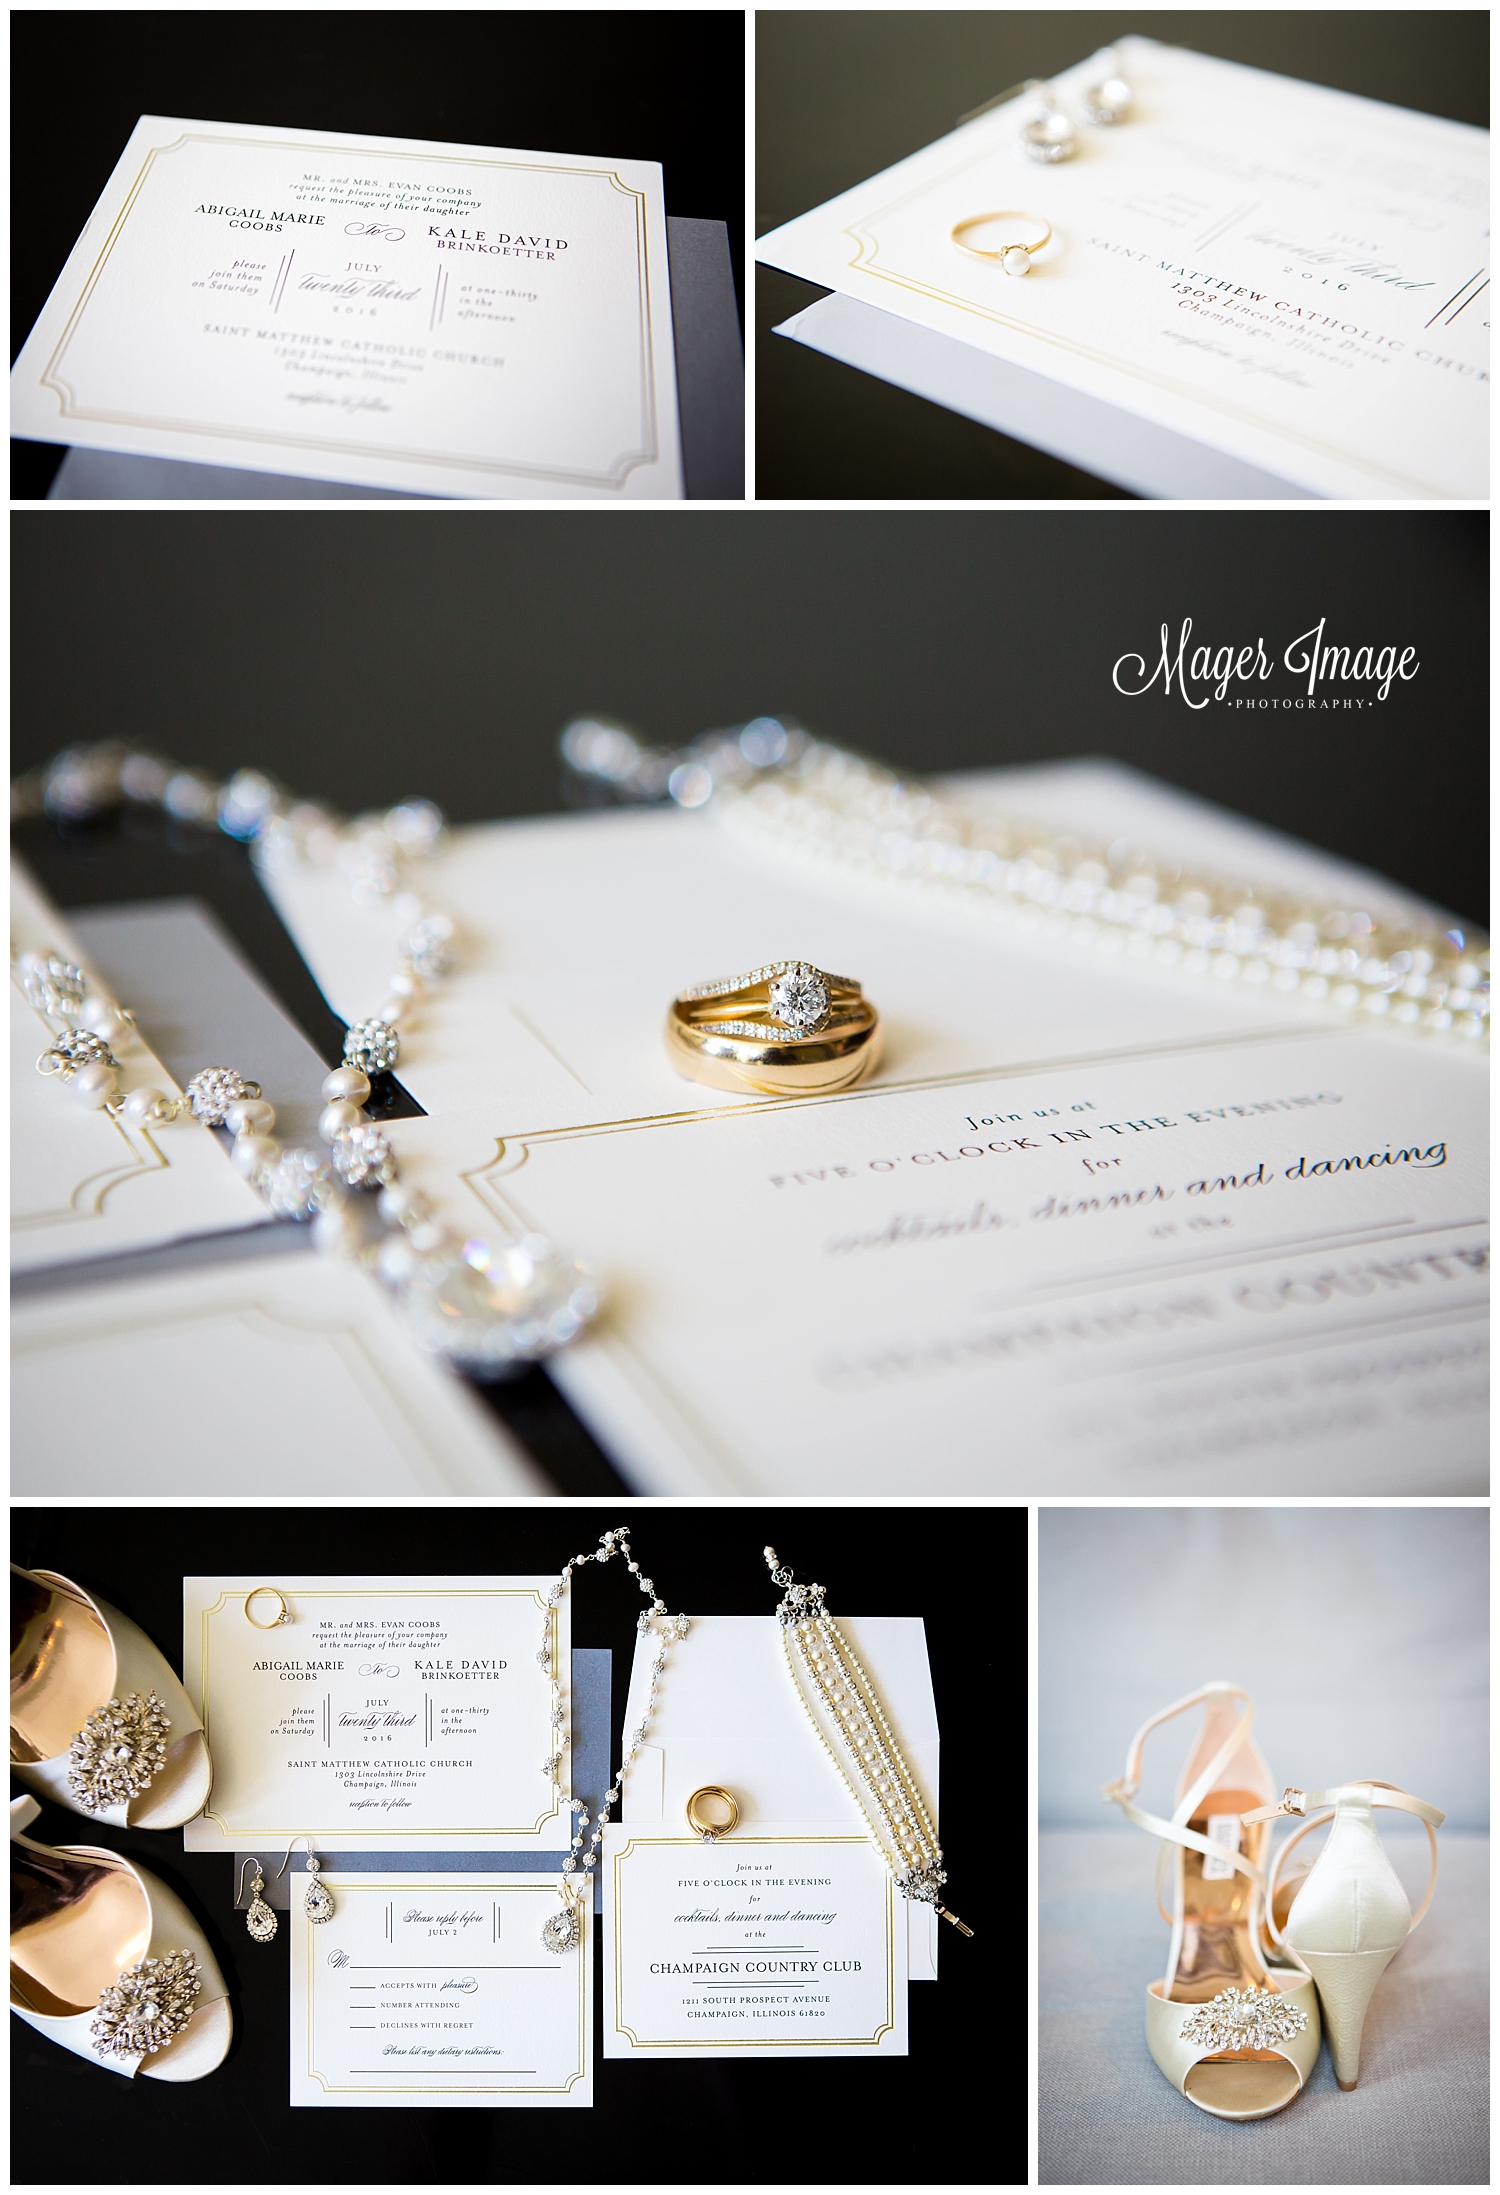 minted.com invites and michelle's bridal jewelry 